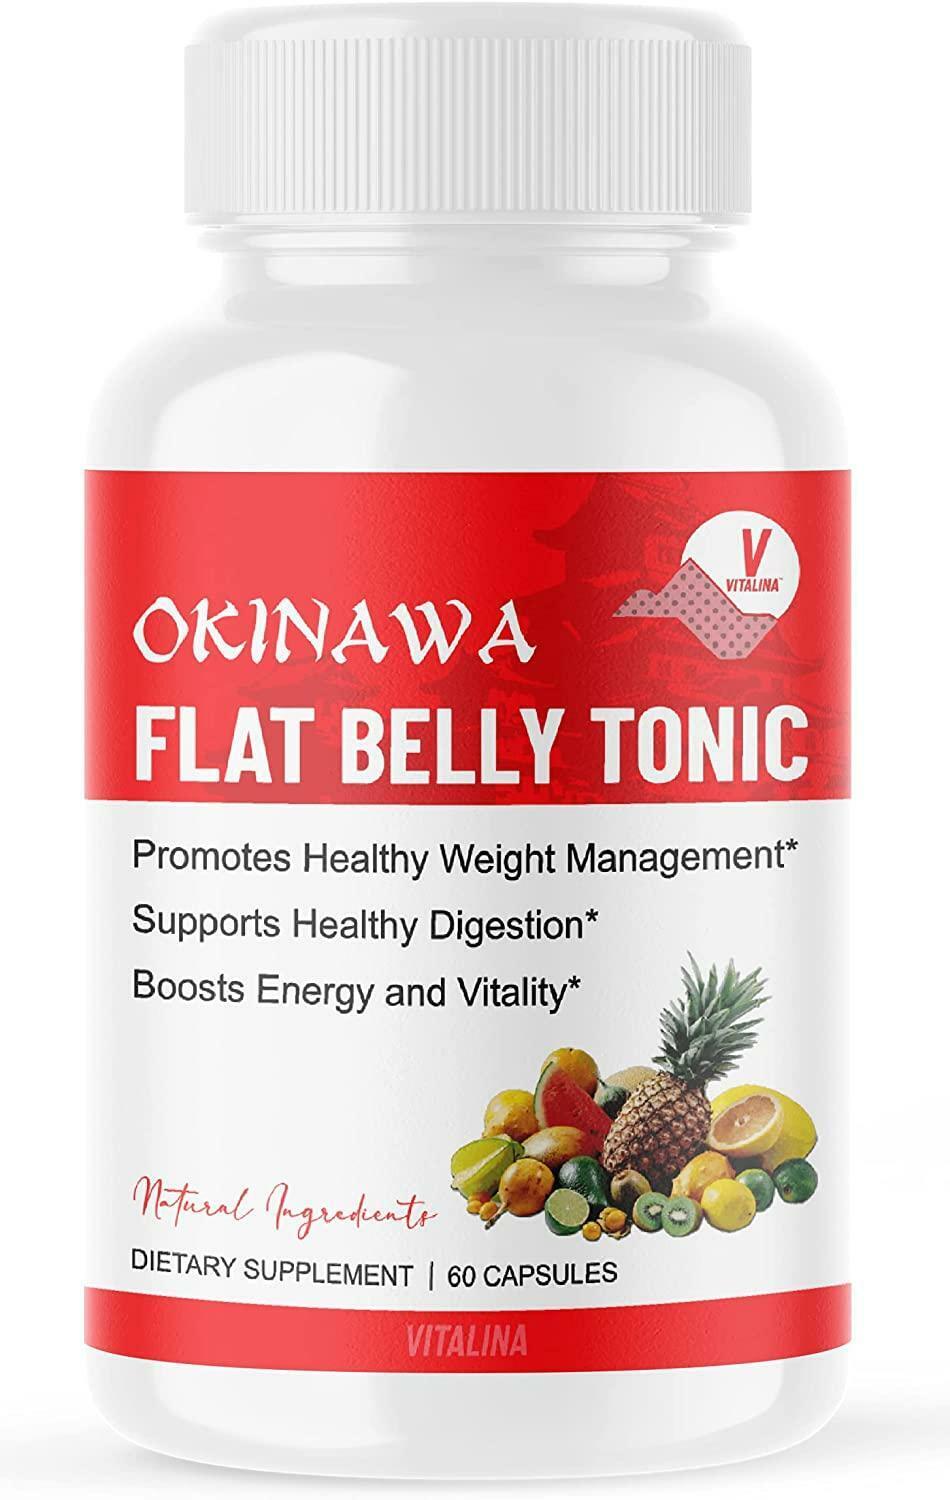 Official Okinawa Flat Belly Tonic 1 Bottle Package 30 Day Supply